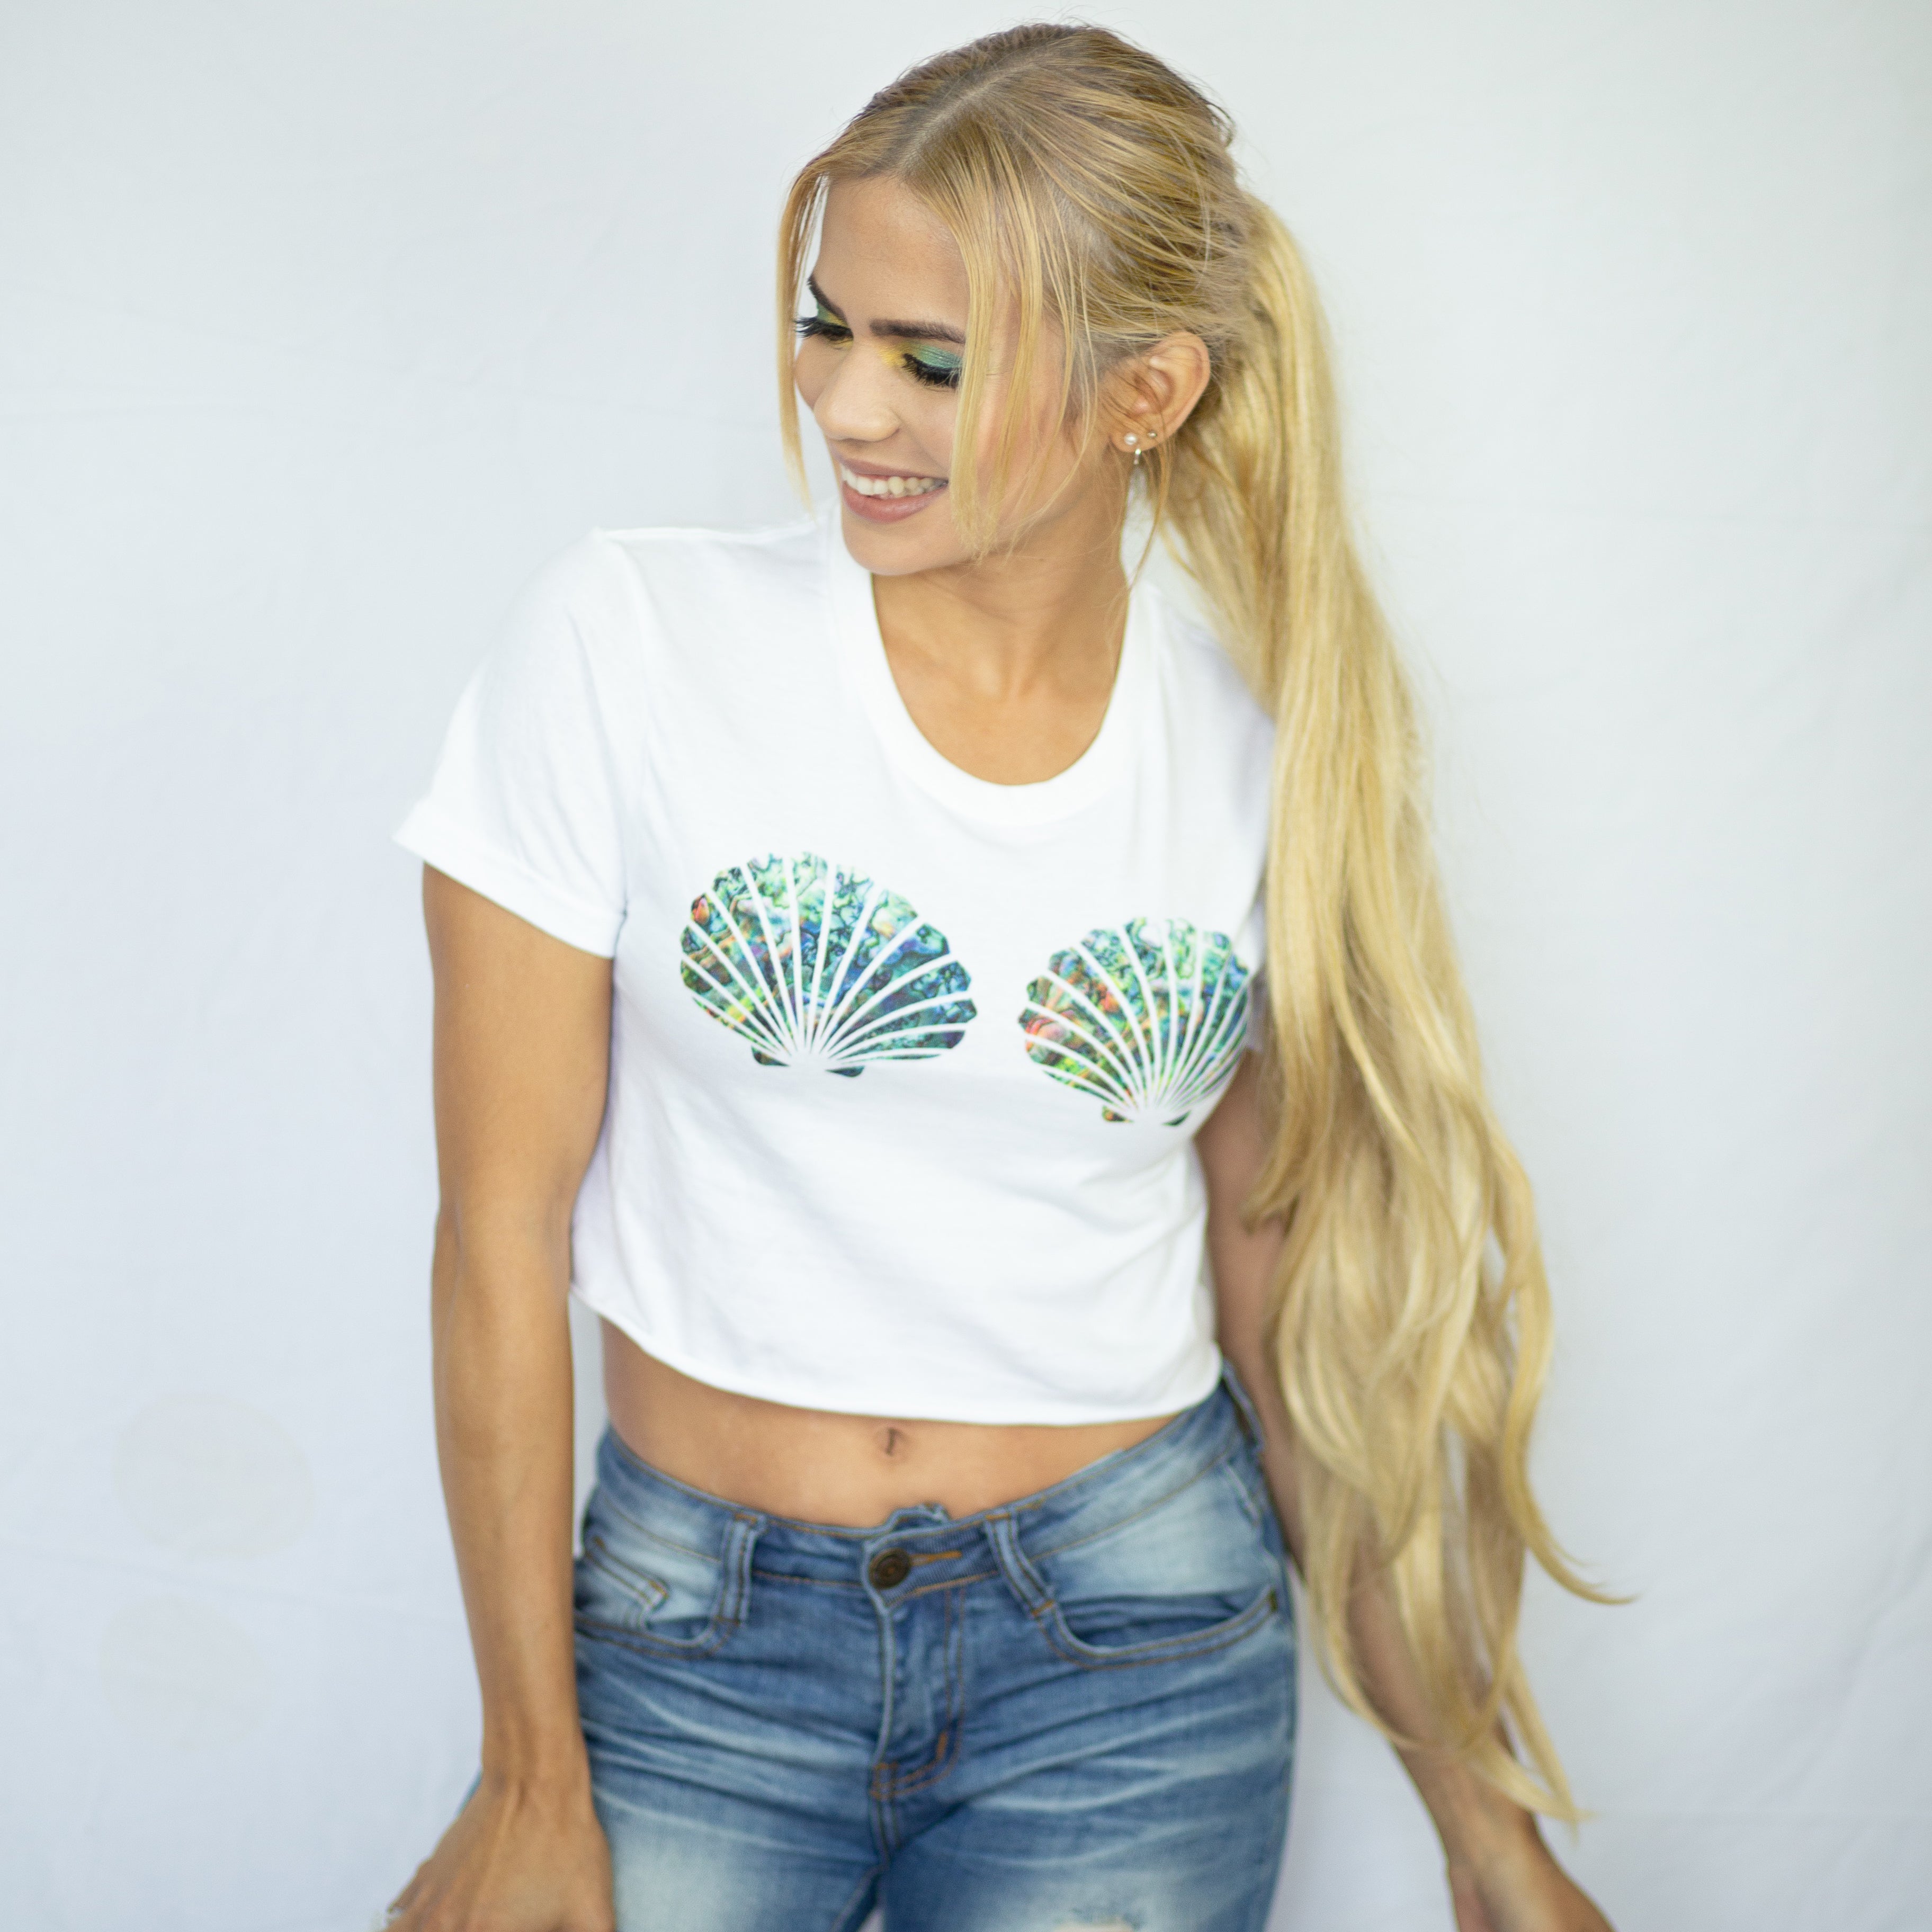 Abalone Mermaid Shell Top Cropped by Cape Cali worn by Mermaid Elle